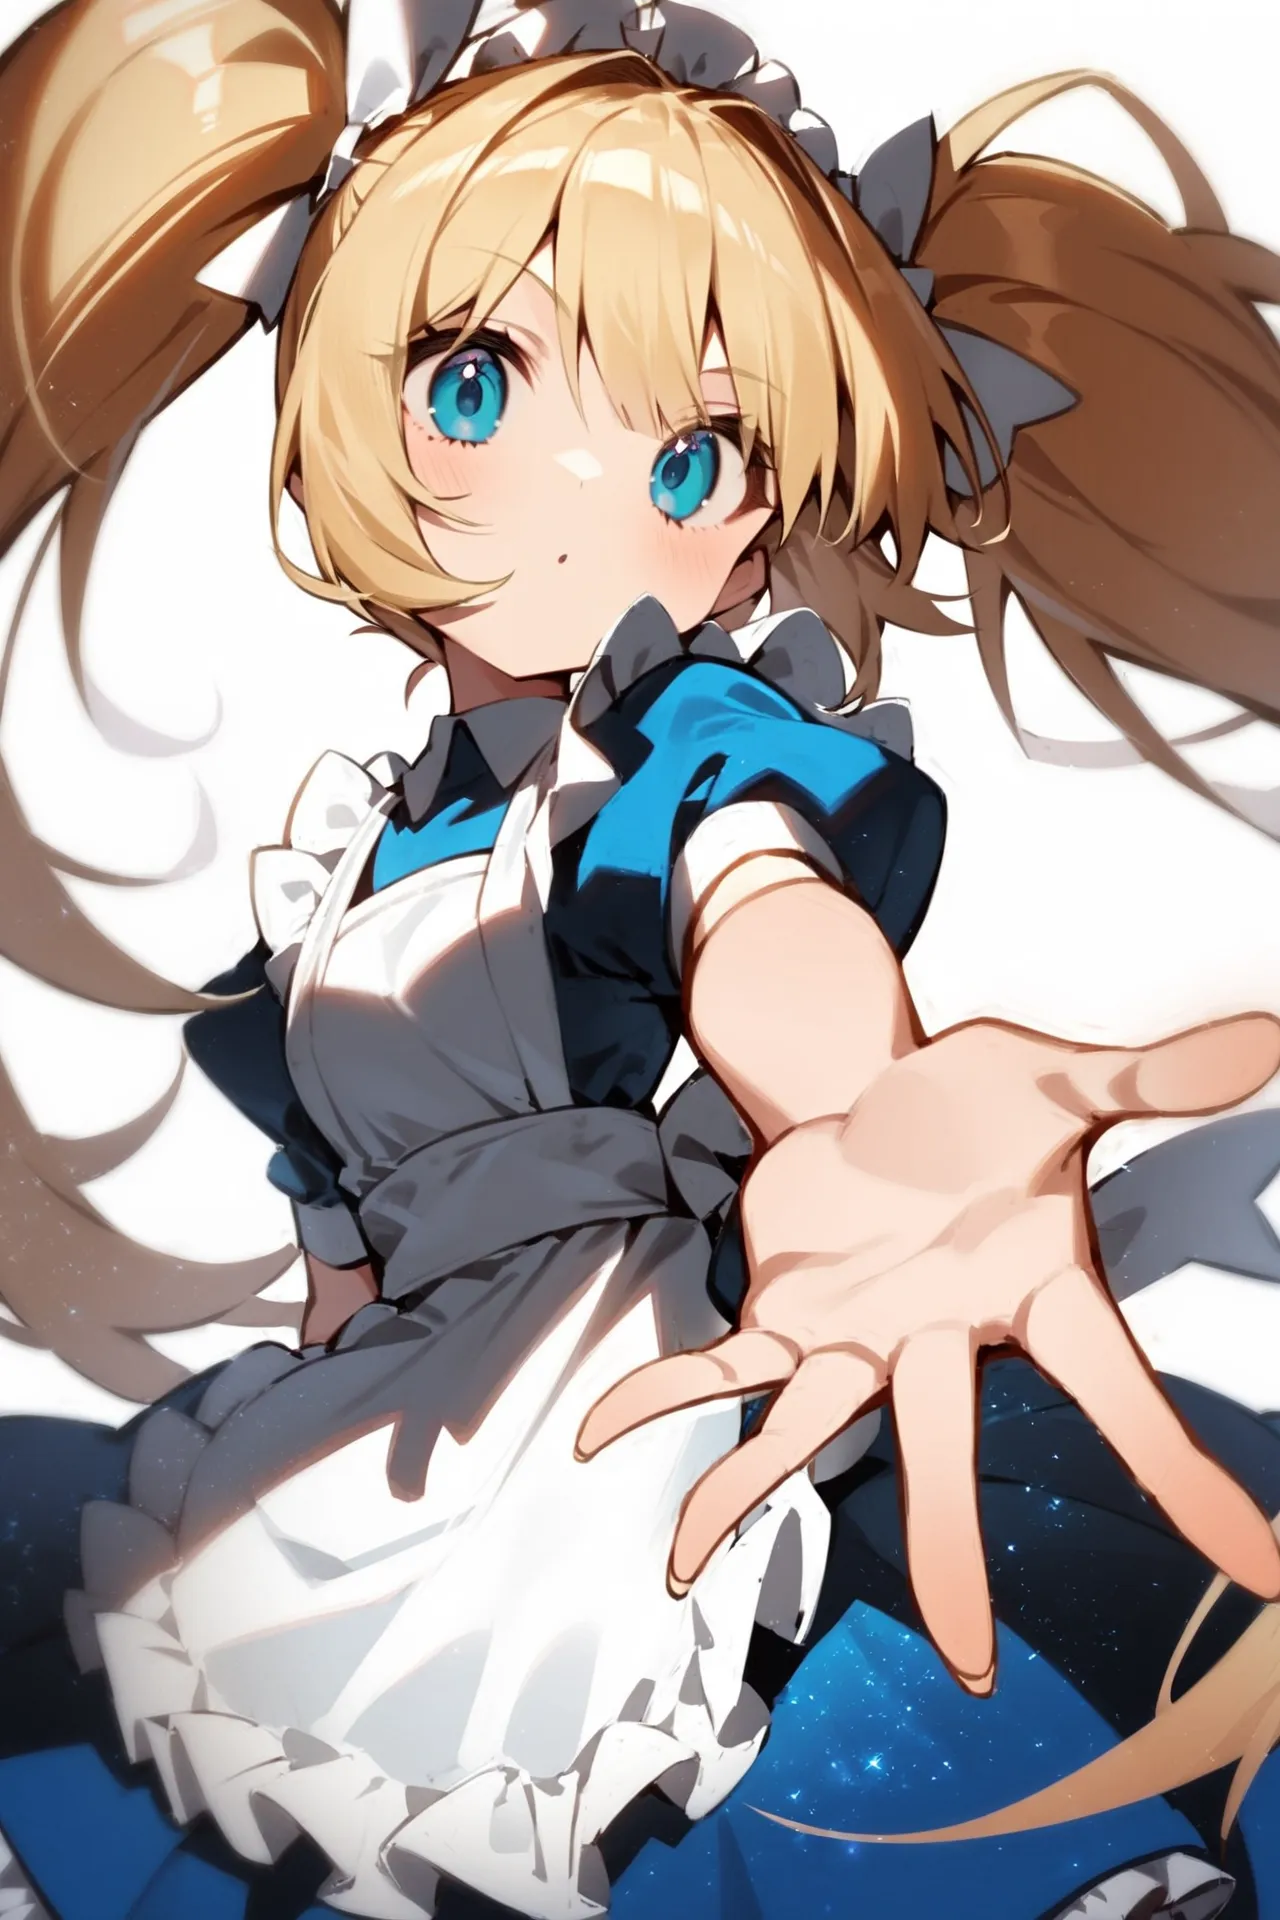 '1girl, reaching,\nblonde hair, twintails, blue dress, white apron,\nwhite background,\nAlice in glitterworld\nNegative prompt: (worst quality, low quality:1.4), nsfw\nSteps: 35, Sampler: DPM++ 2M SDE Karras, CFG scale: 7, Seed: 1, Size: 640x960, Model hash: 642b08ca49, Model: ConfusionXL2.0_fp16_vae, VAE hash: 63aeecb90f, VAE: sdxl_vae_0.9.safetensors, Denoising strength: 0.6, Clip skip: 2, Hires upscale: 2, Hires steps: 15, Hires upscaler: ESRGAN_4x, Eta: 0.68, Version: v1.7.0'